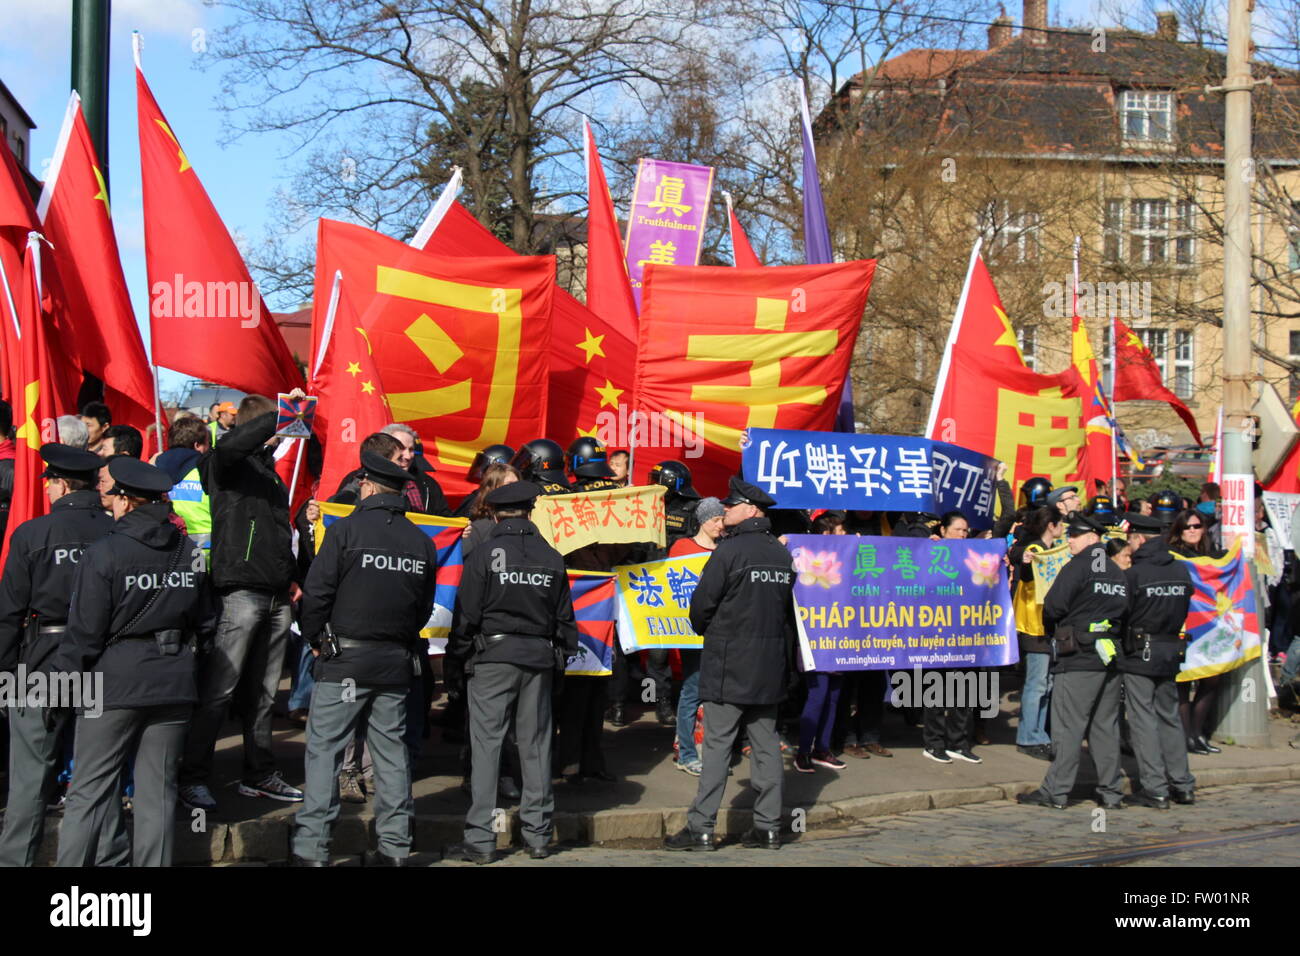 a tense situation arose on Prague's Badeniho Street where it intersects with Chodkova Street (Chodkova Street is to the left of this photograph) right on President Xi Jinping's route to Prague Castle to conduct official state business with Zeman. The flags of the People's Republic of China and corresponding banners clearly mark welcome towards Xi Jinping. However, among persons standing there are also supporters of Falun Gong, who hold up banners calling for an end to the torture and persecution of Falun Gong practitioners. Pro-Tibet protesters also. Stock Photo